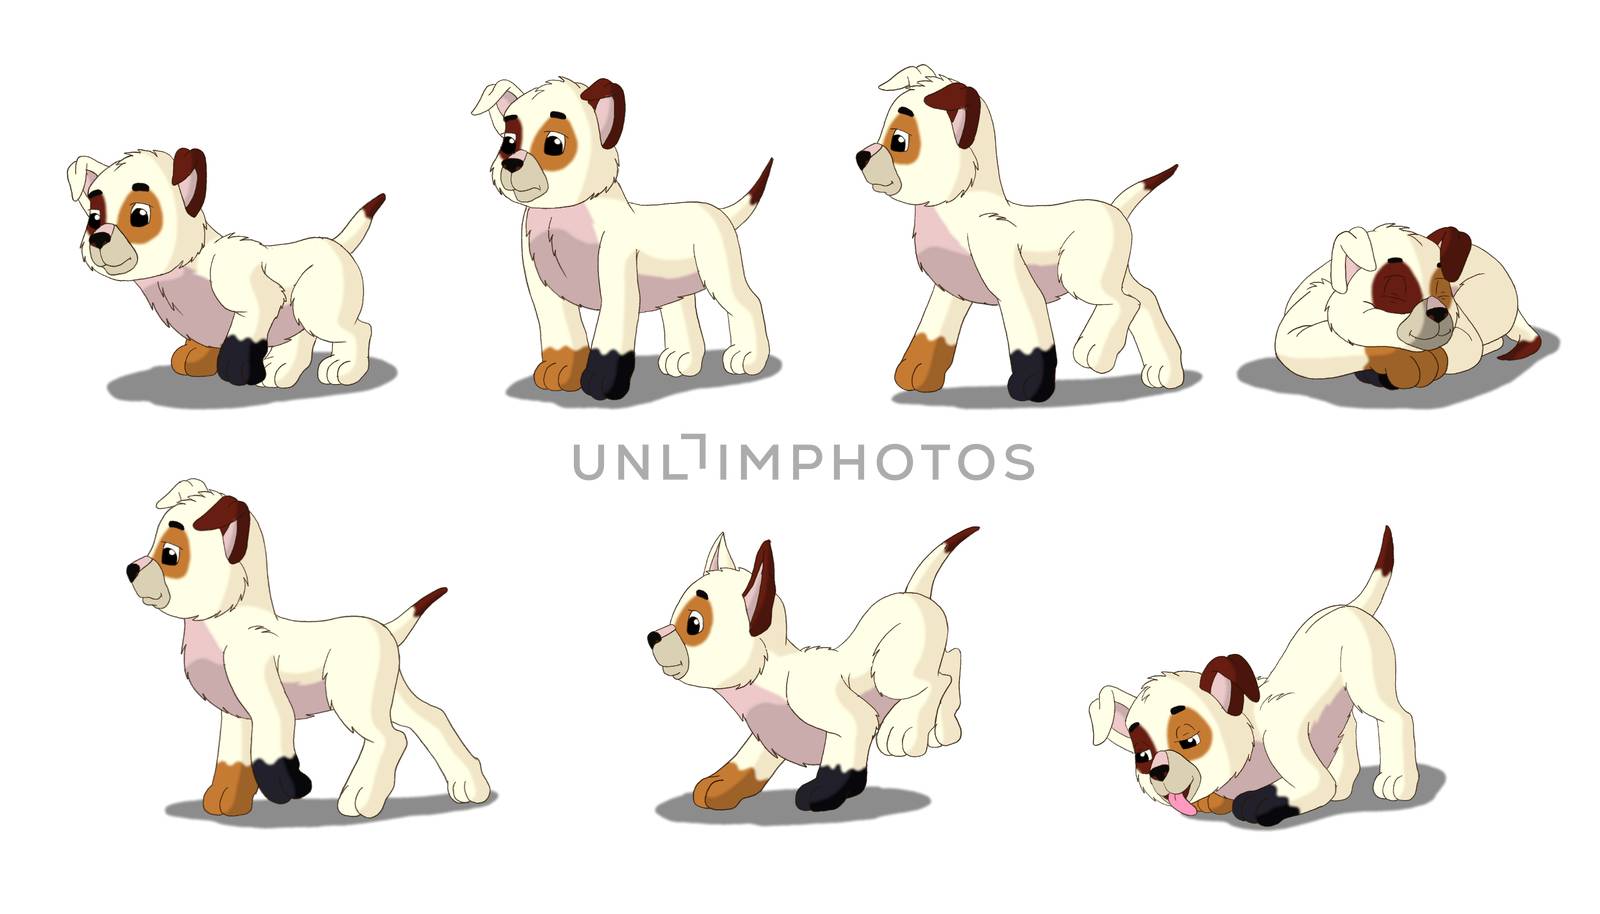 Set of white Puppy images.  Digital painting  full color cartoon style illustration isolated on white background.